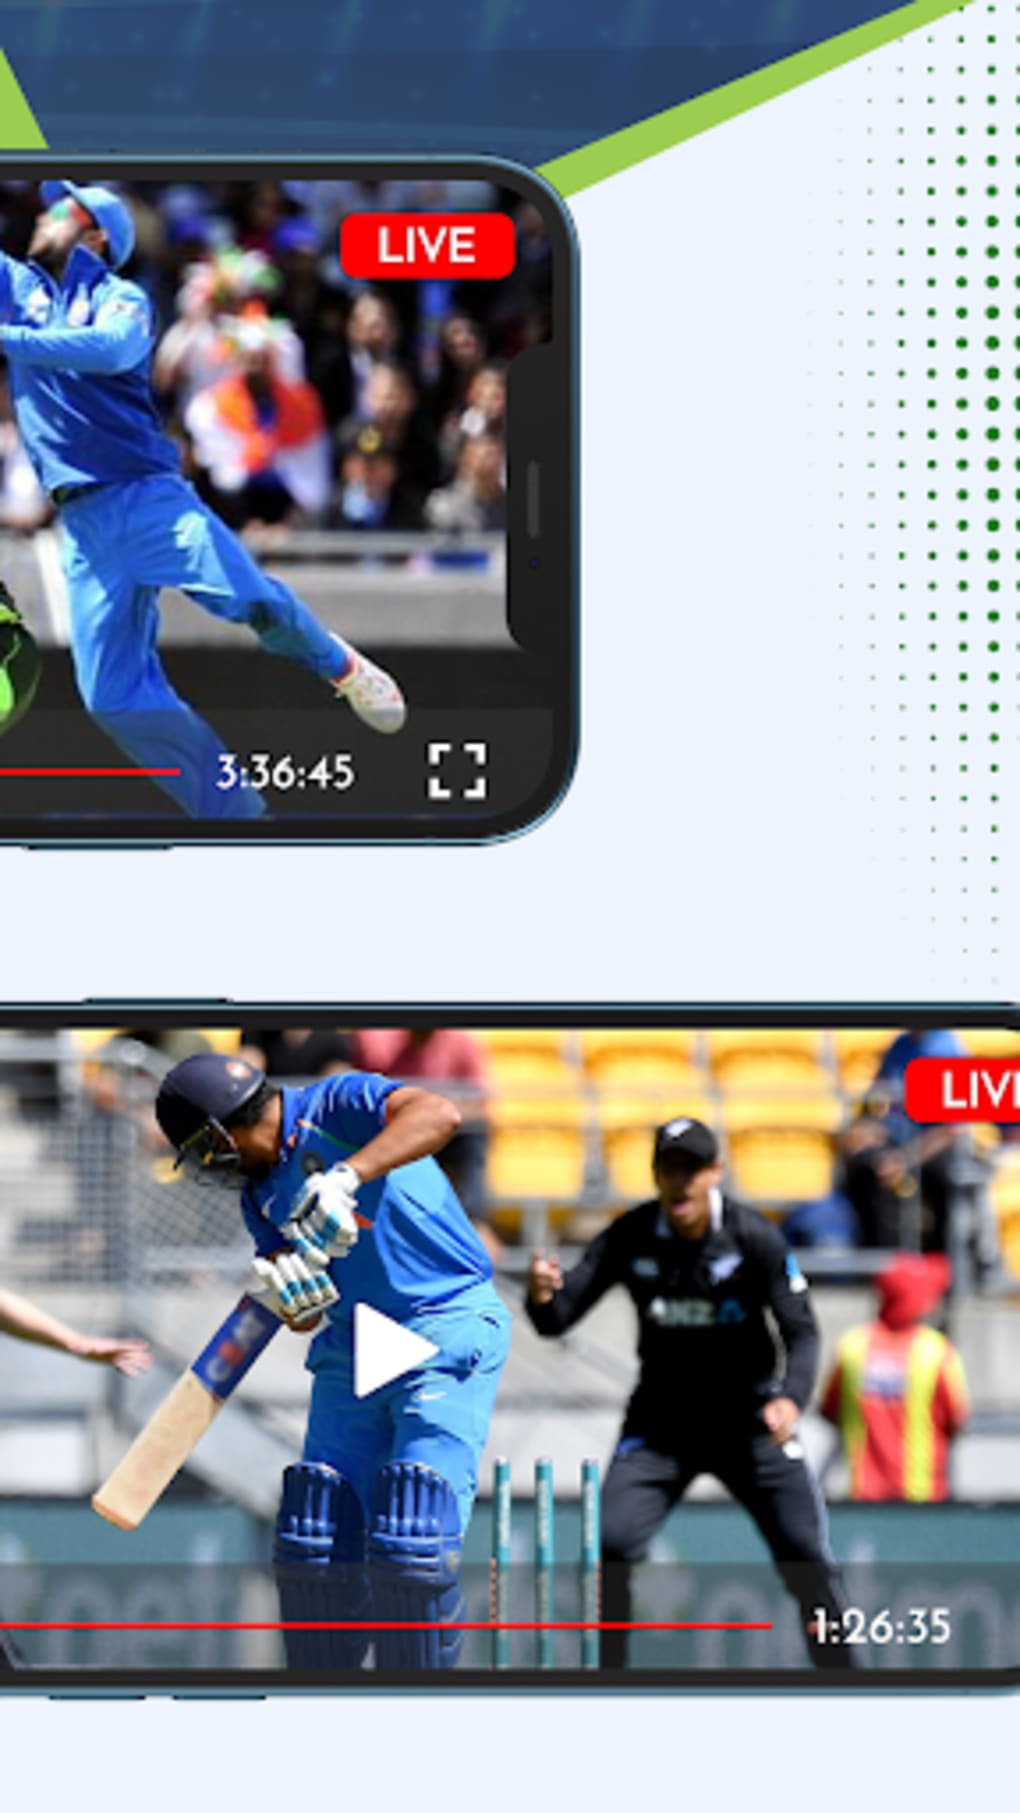 live cricket match streaming on android mobile